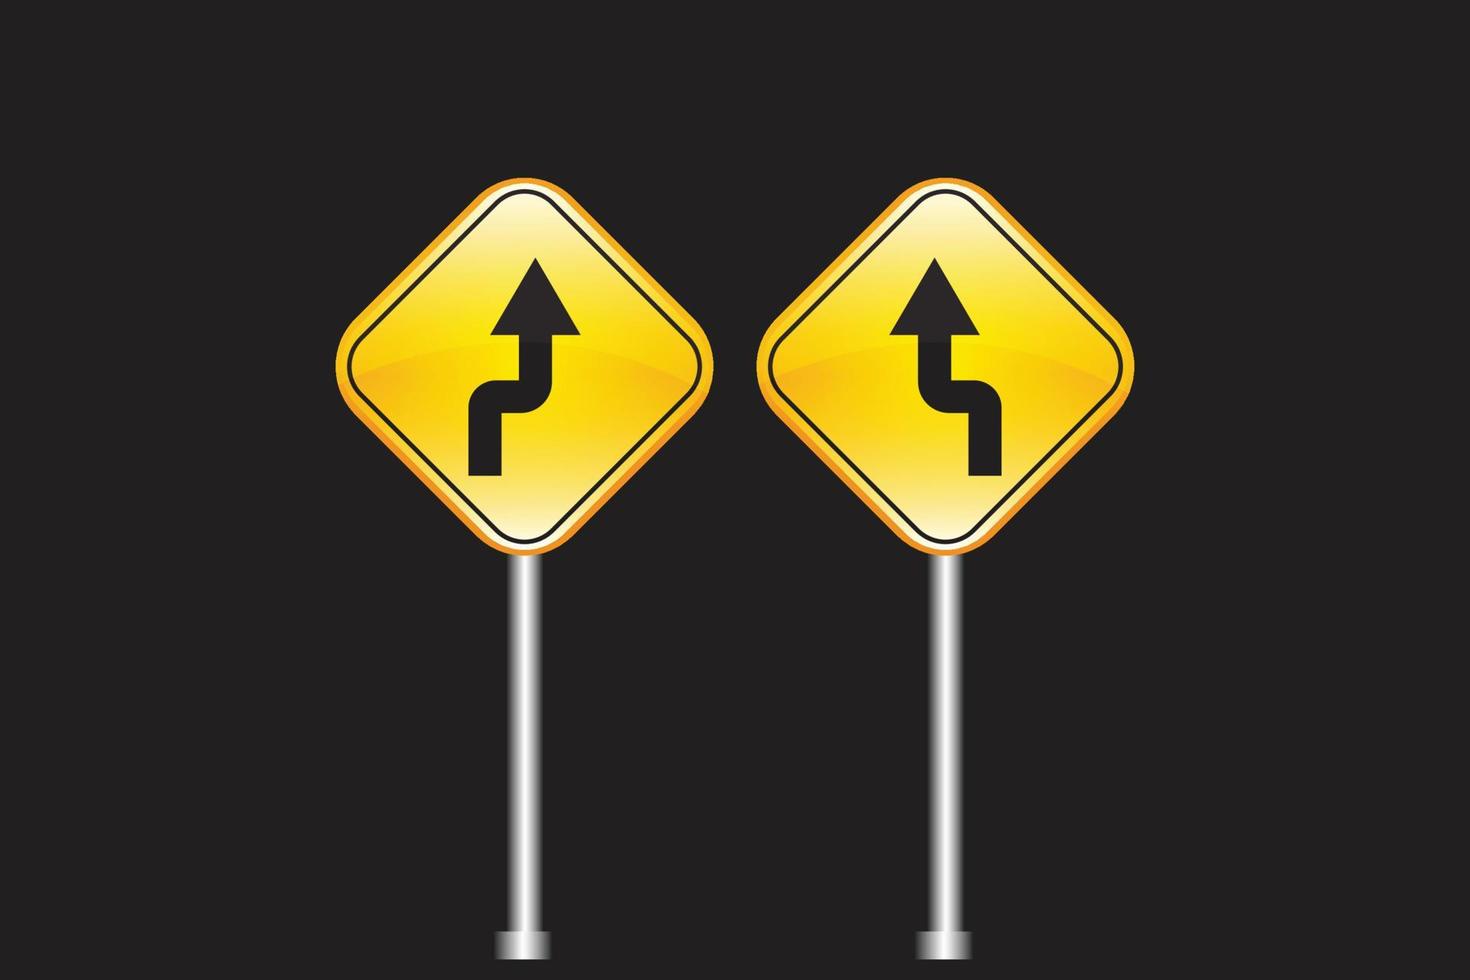 set of Direction road sings. road signs isolated on background. vector illustration